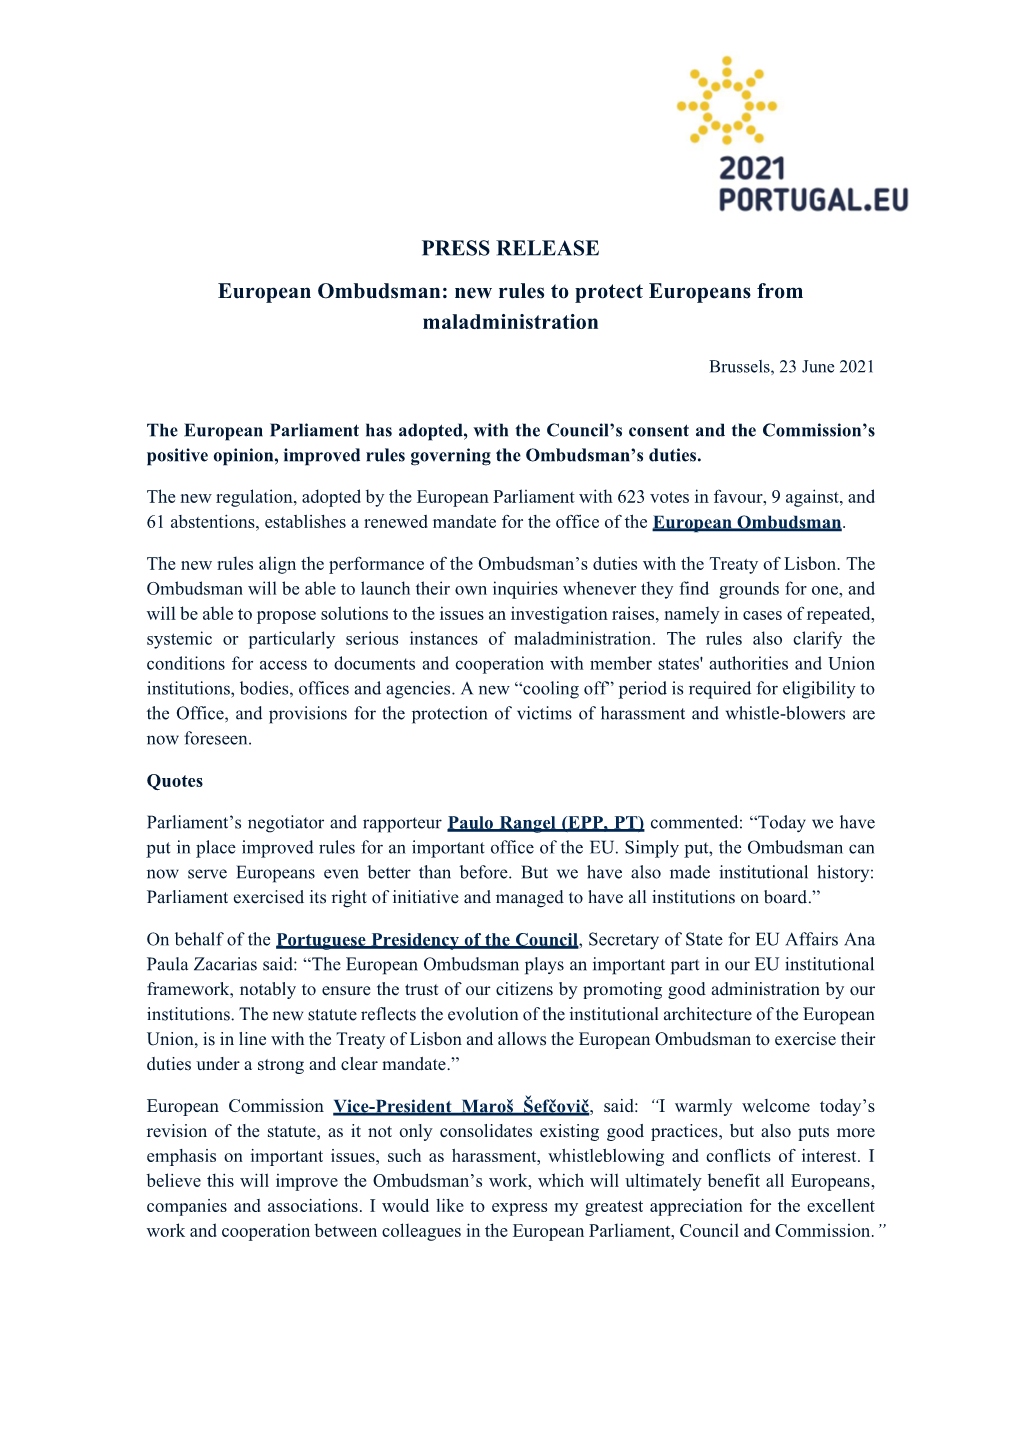 PRESS RELEASE European Ombudsman: New Rules to Protect Europeans from Maladministration